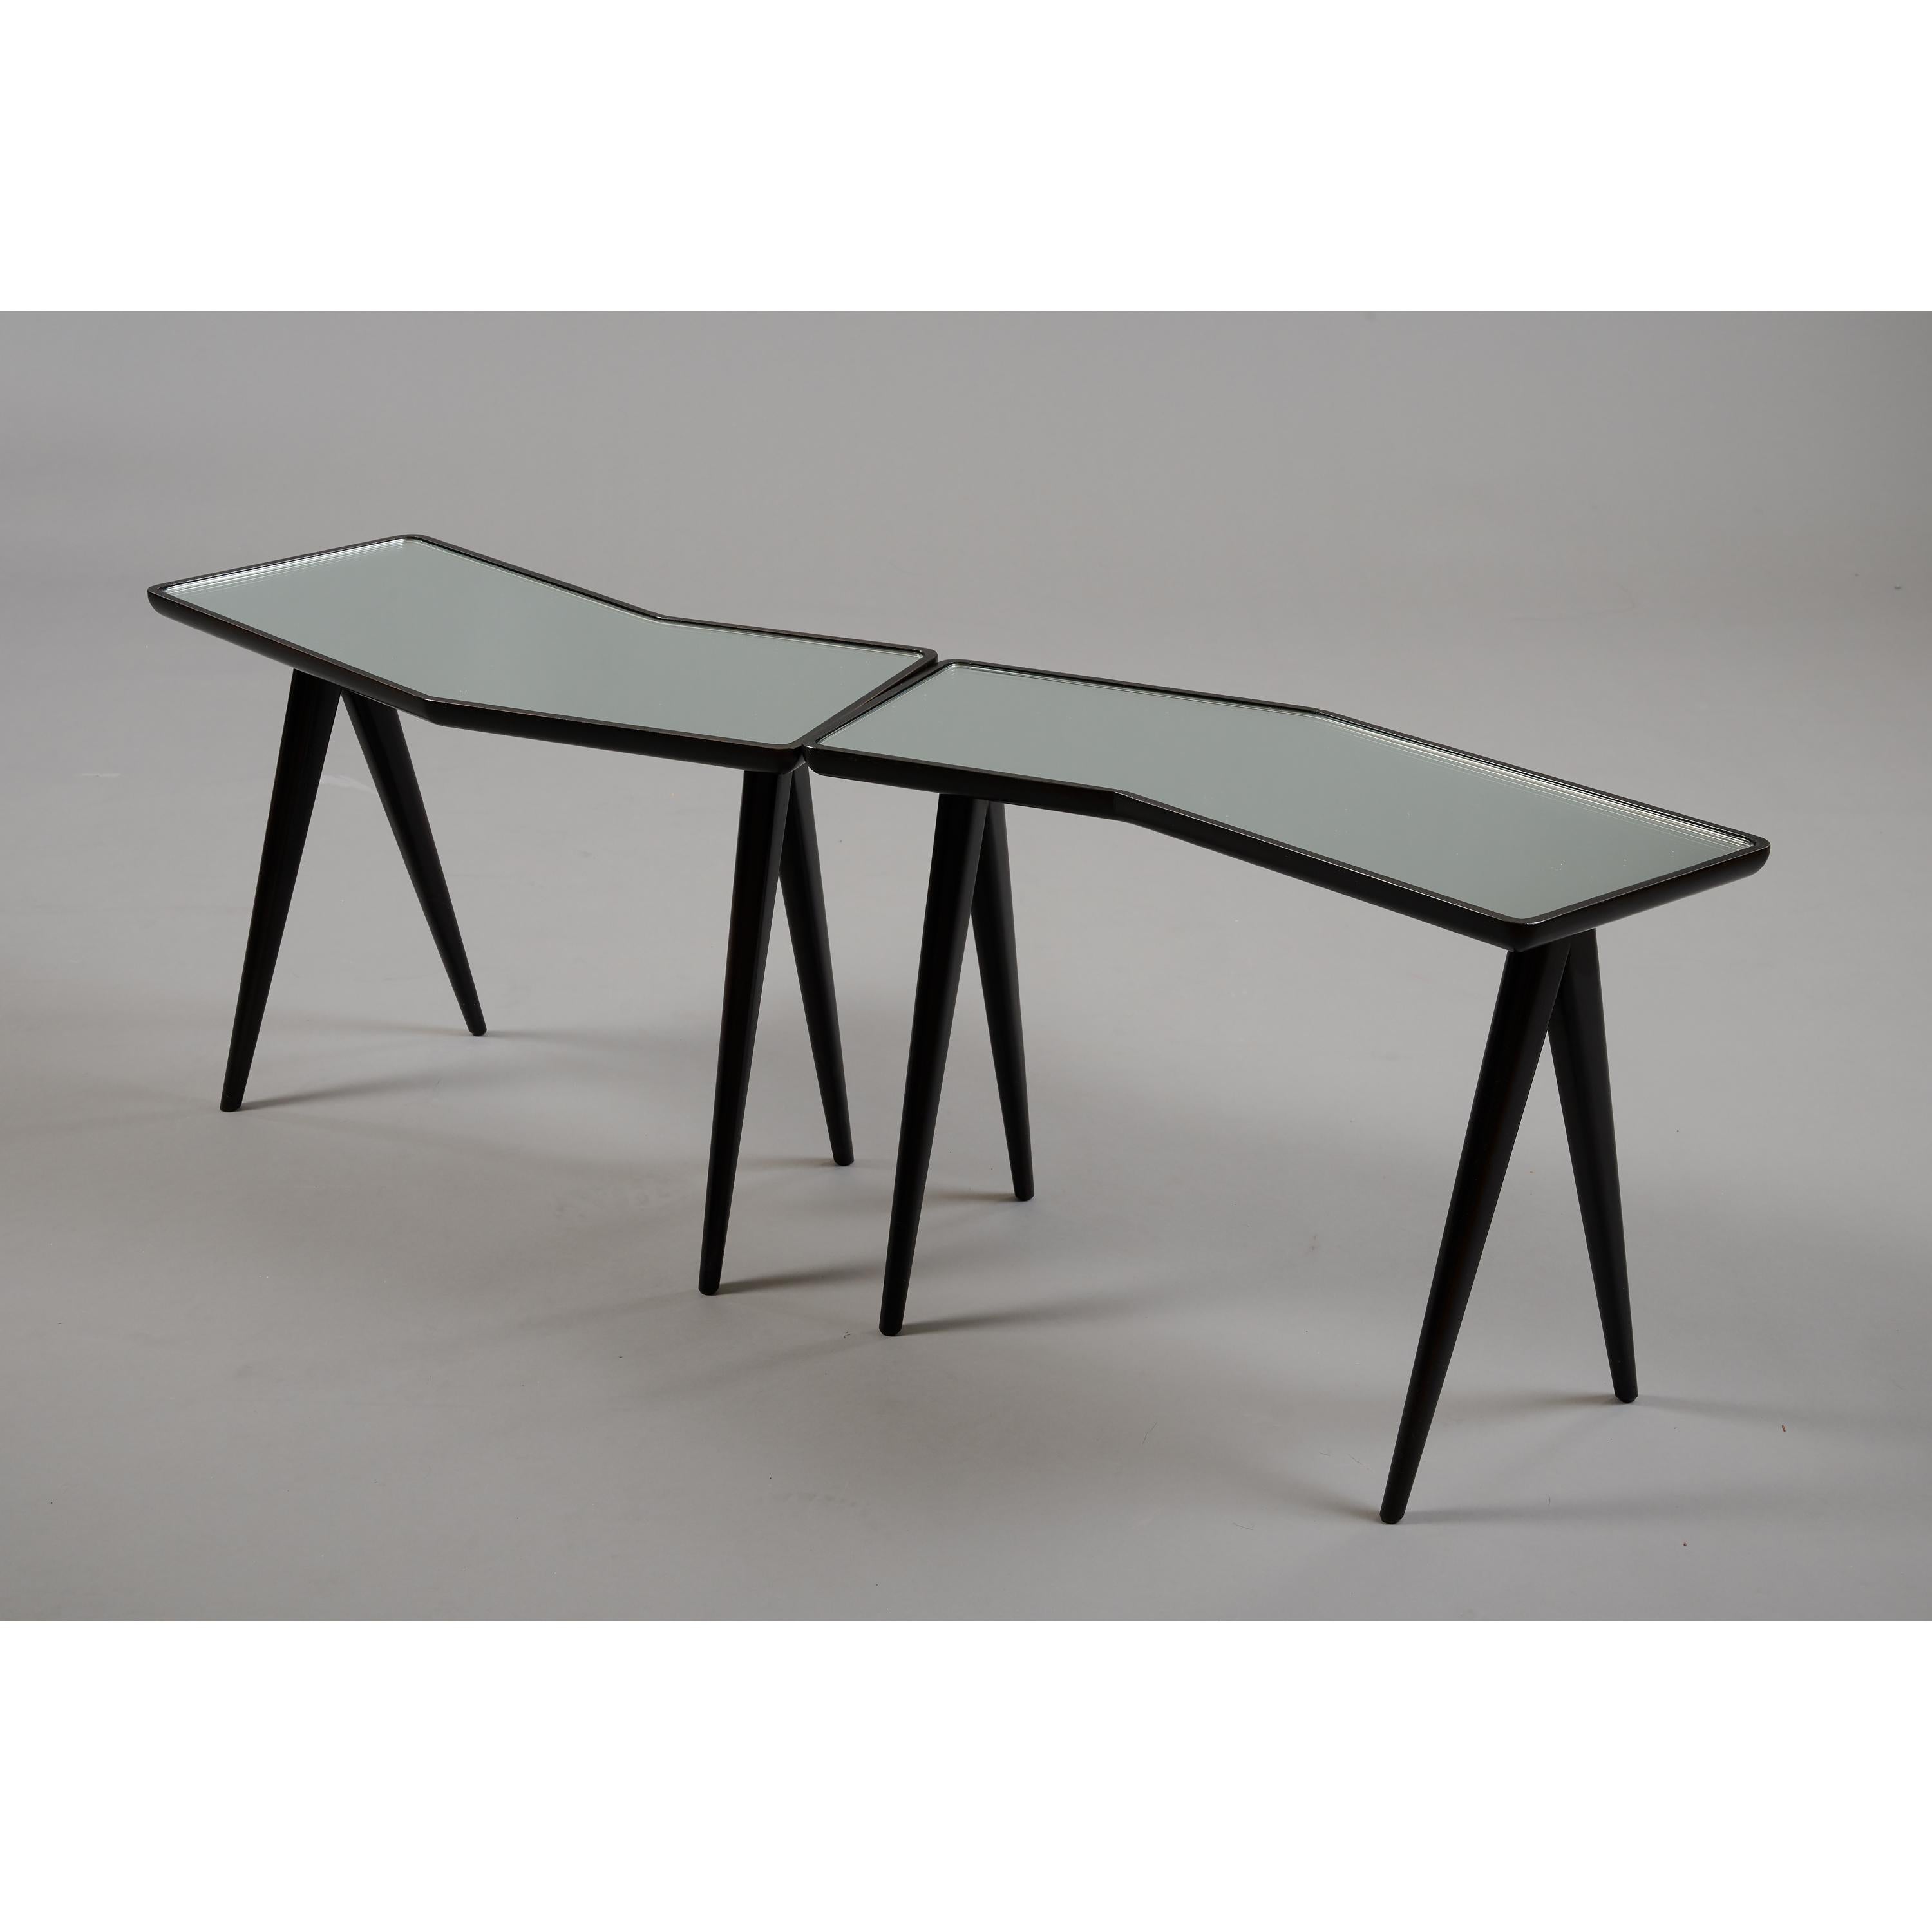 Gio Ponti Pair of Geometric Nesting Tables with Mirrored Tops, Italy, 1950's For Sale 1